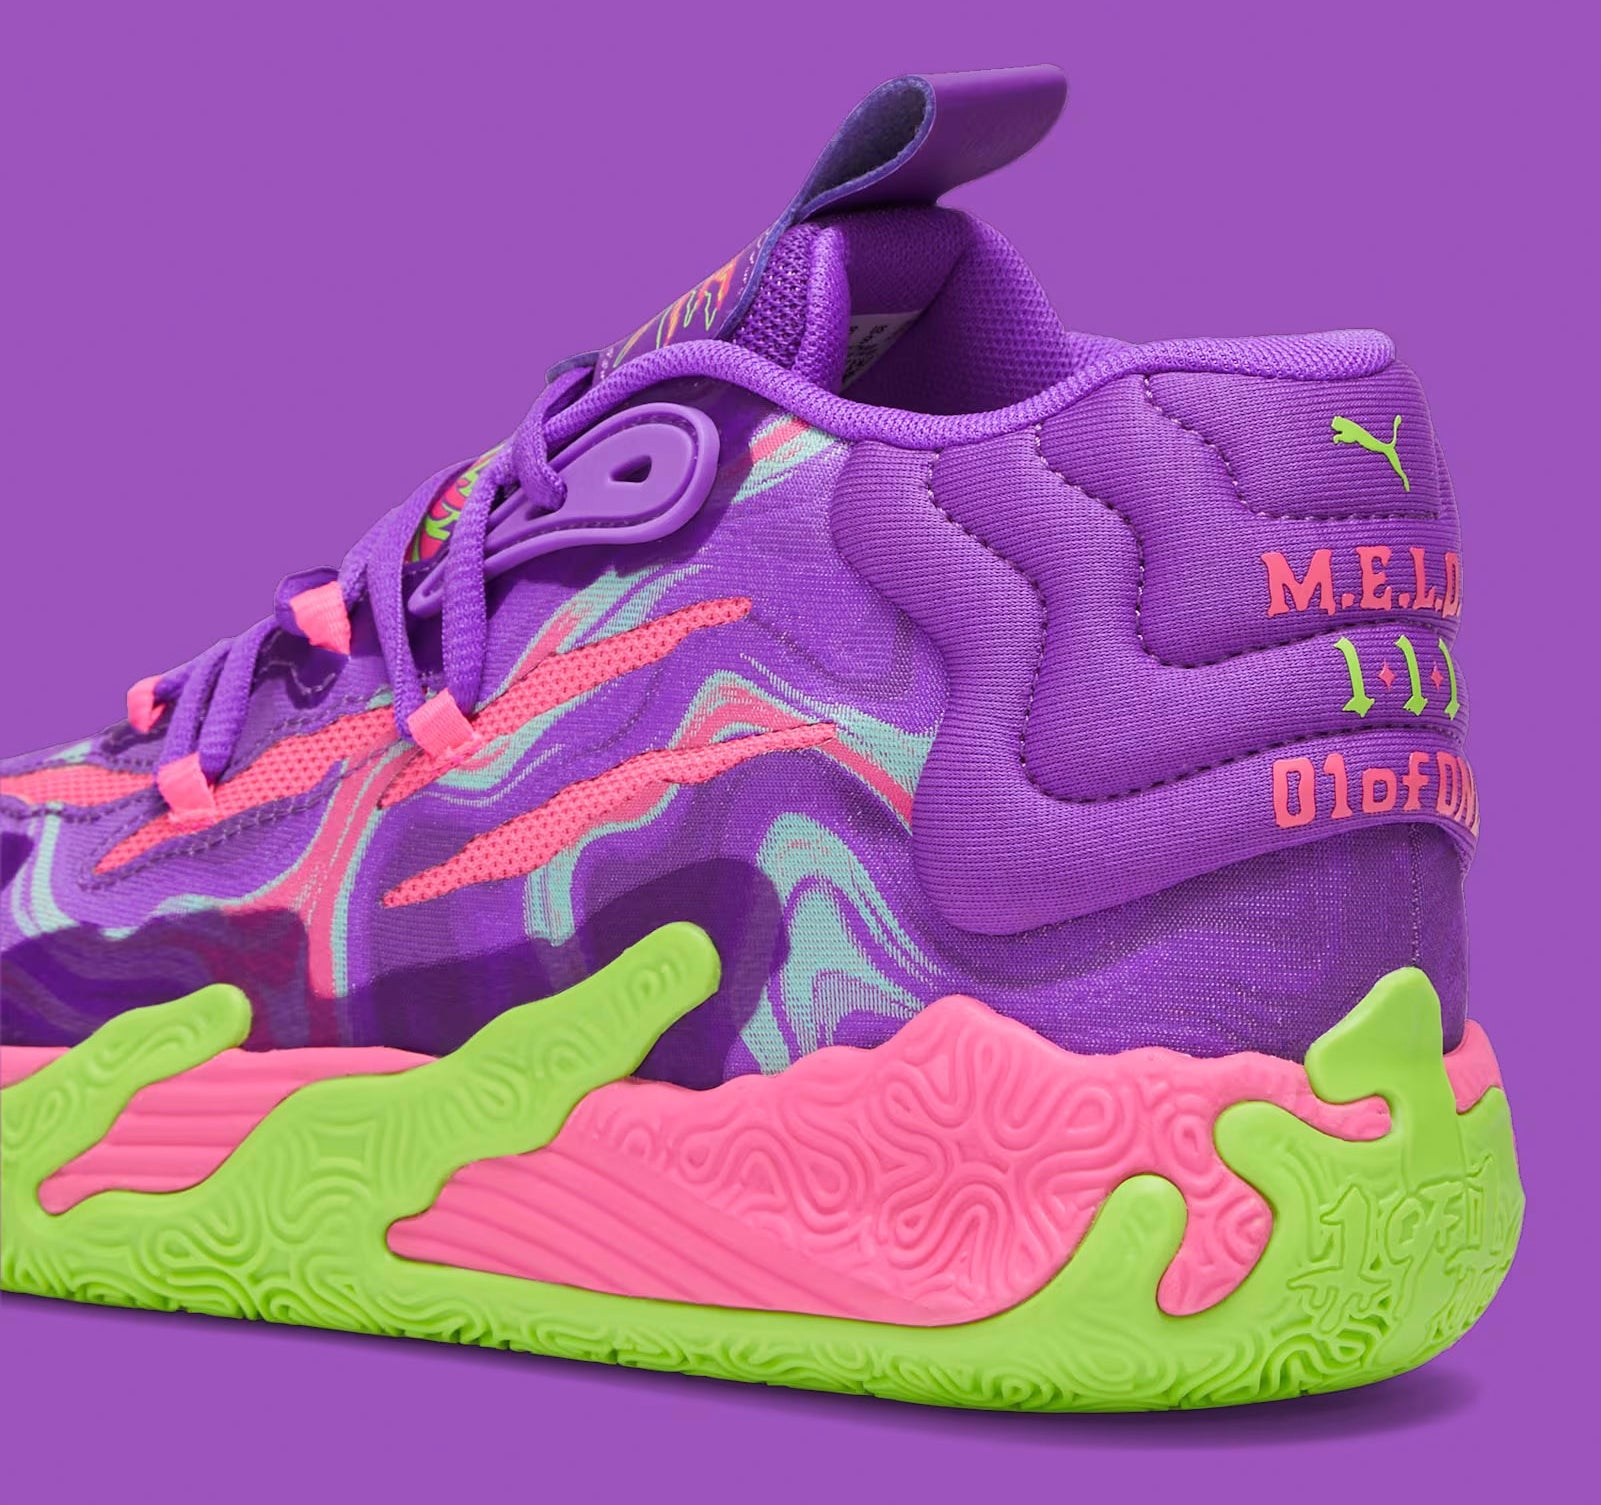 Puma Melo MB.03 Toxic Release Date 378916_01 Heel Detail